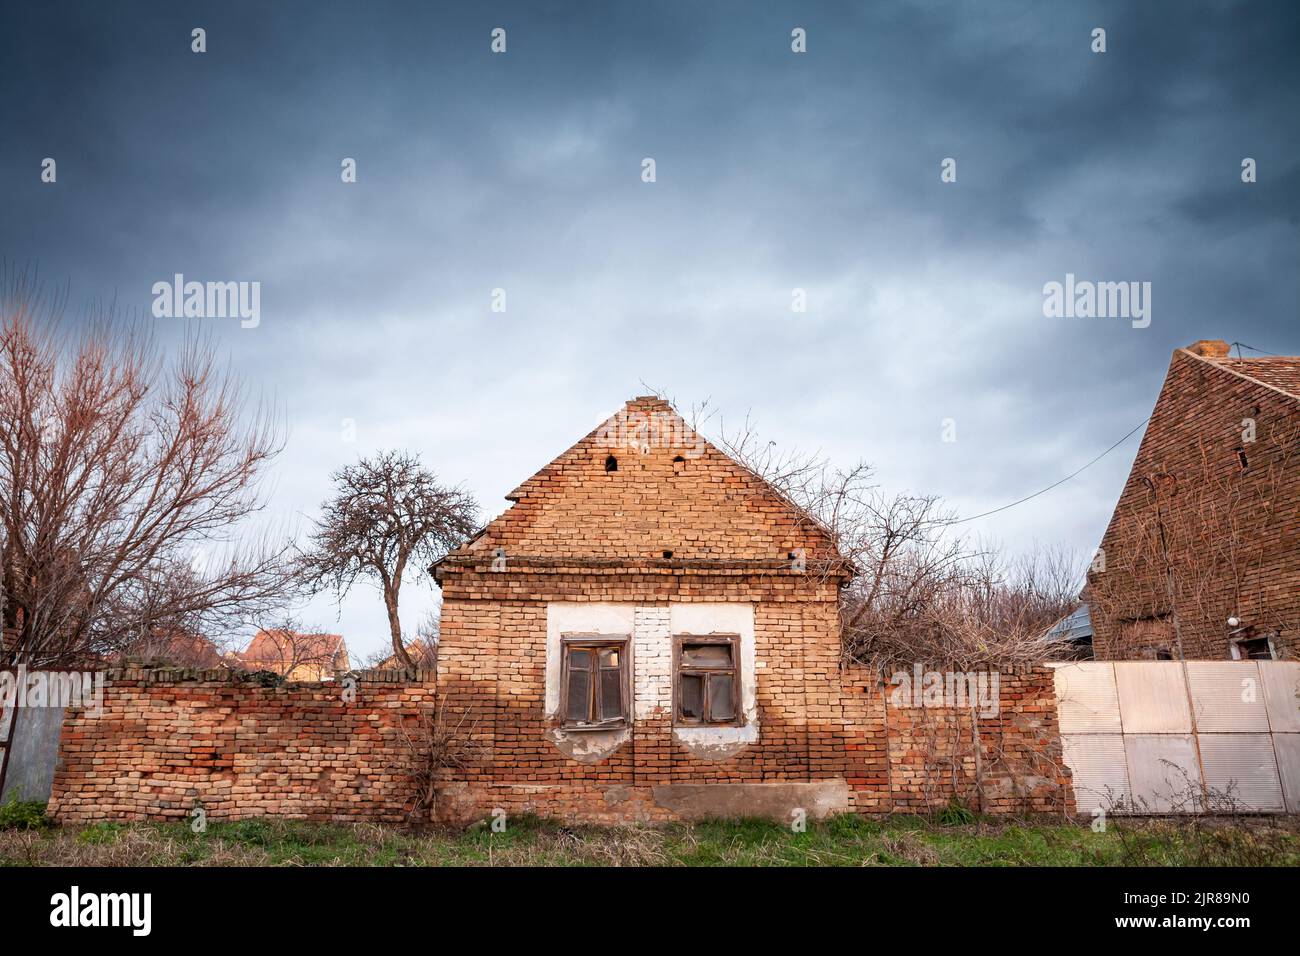 Picture of an abandoned farm in Vojvodina, in Serbia, with the facade of its main house being heavily damaged and decaying. Stock Photo